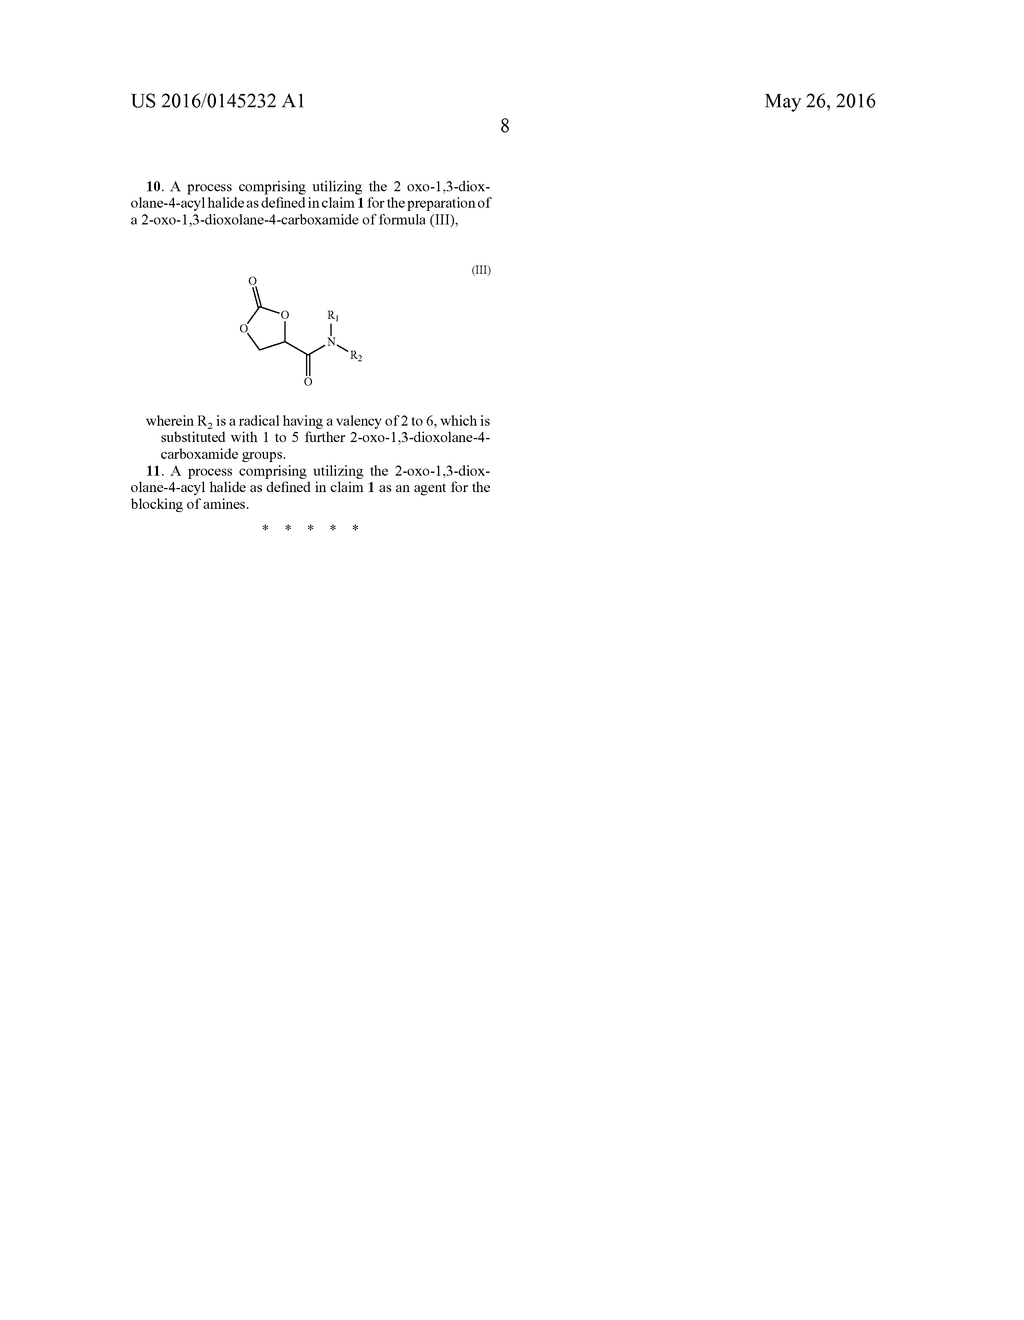 2-OXO-1,3-DIOXOLANE-4-ACYL HALIDES, THEIR PREPARATION AND USE - diagram, schematic, and image 09